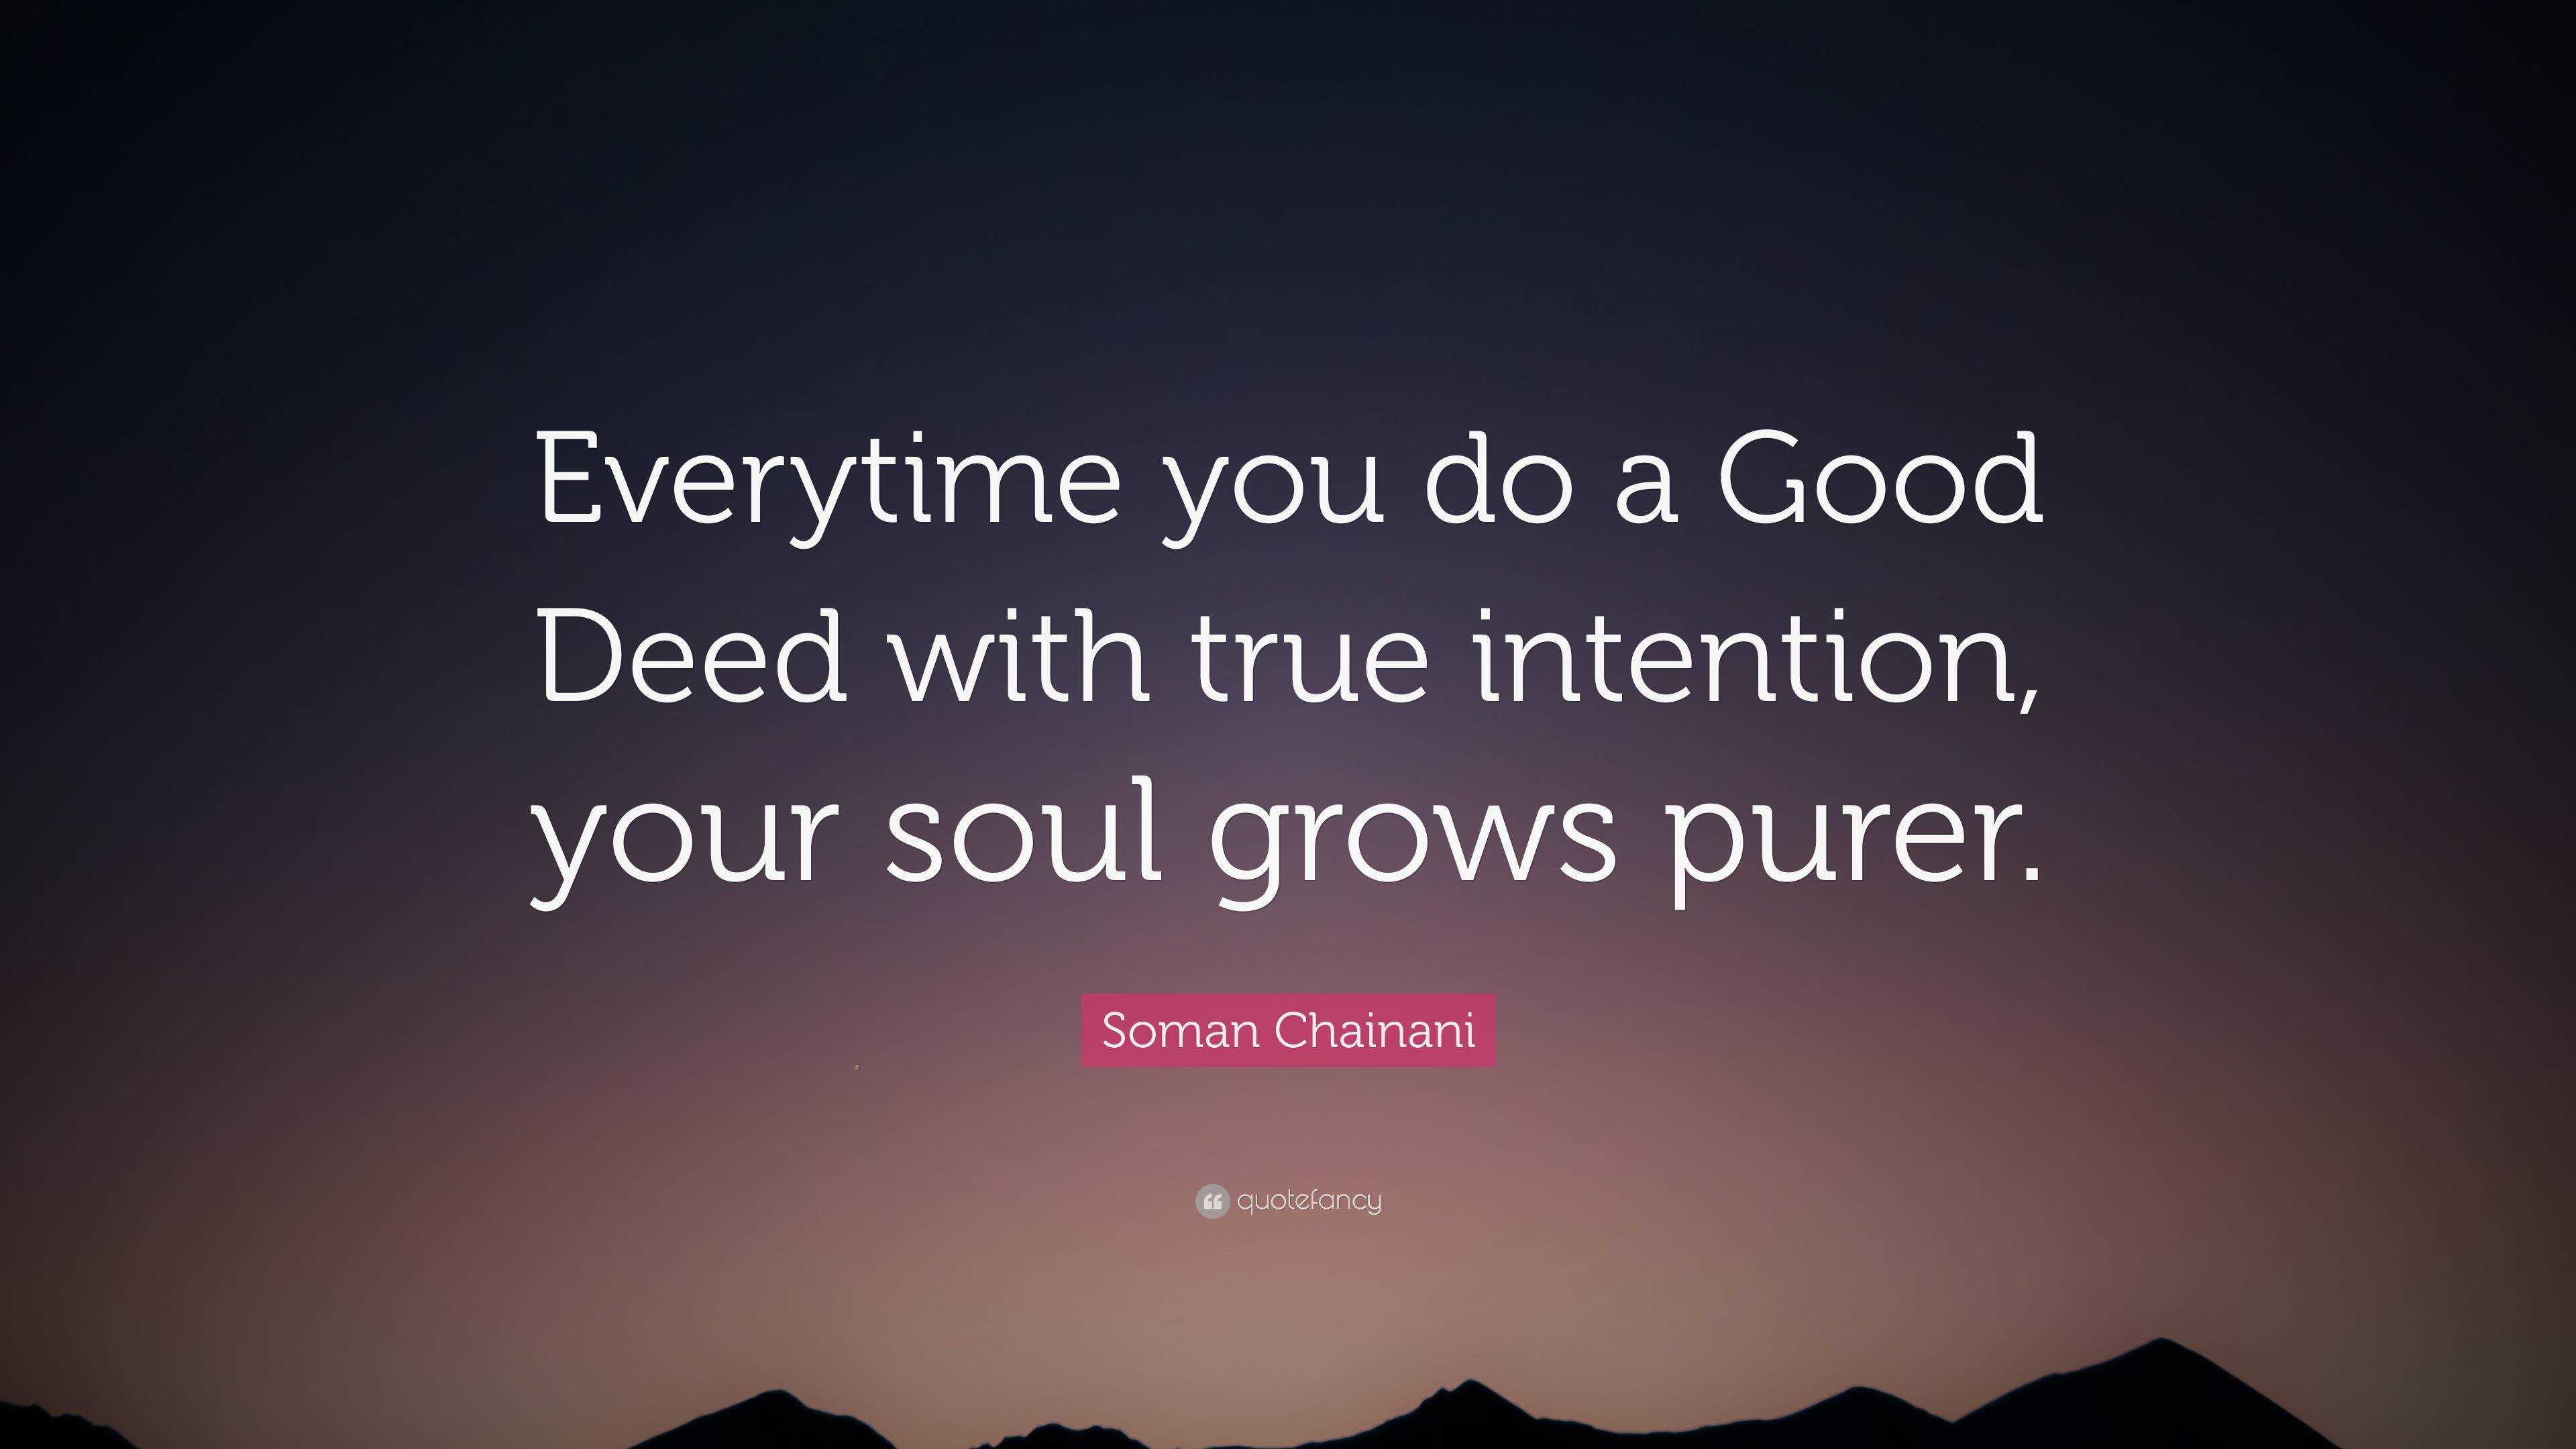 Everytime you do a Good Deed with true intention, your soul grows purer. 